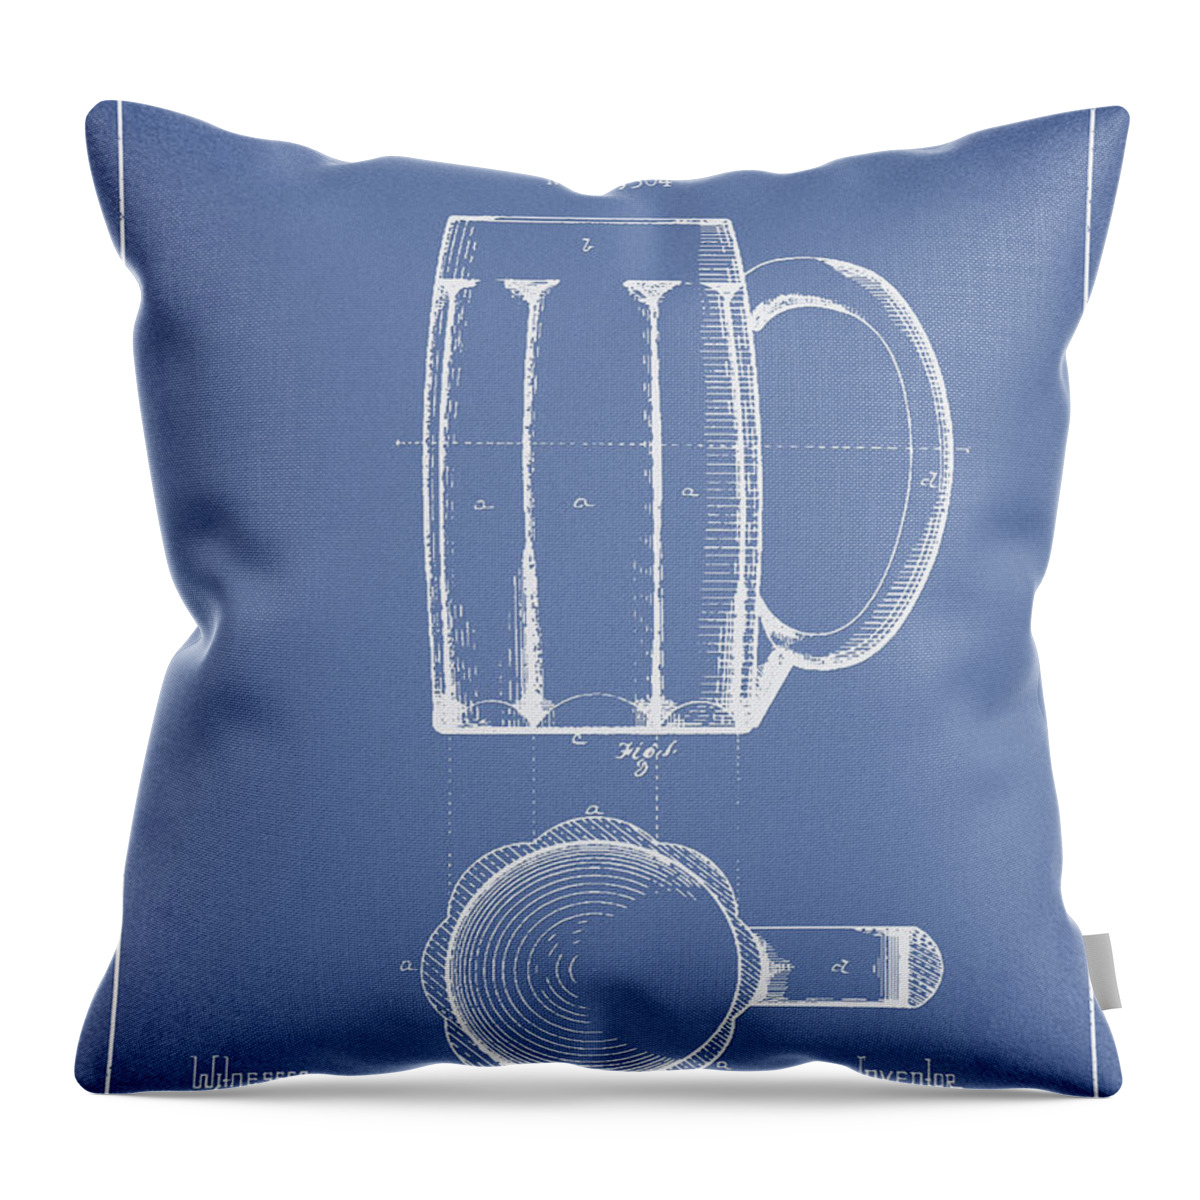 Beer Mug Throw Pillow featuring the digital art Beer Mug Patent from 1876 - Light Blue by Aged Pixel